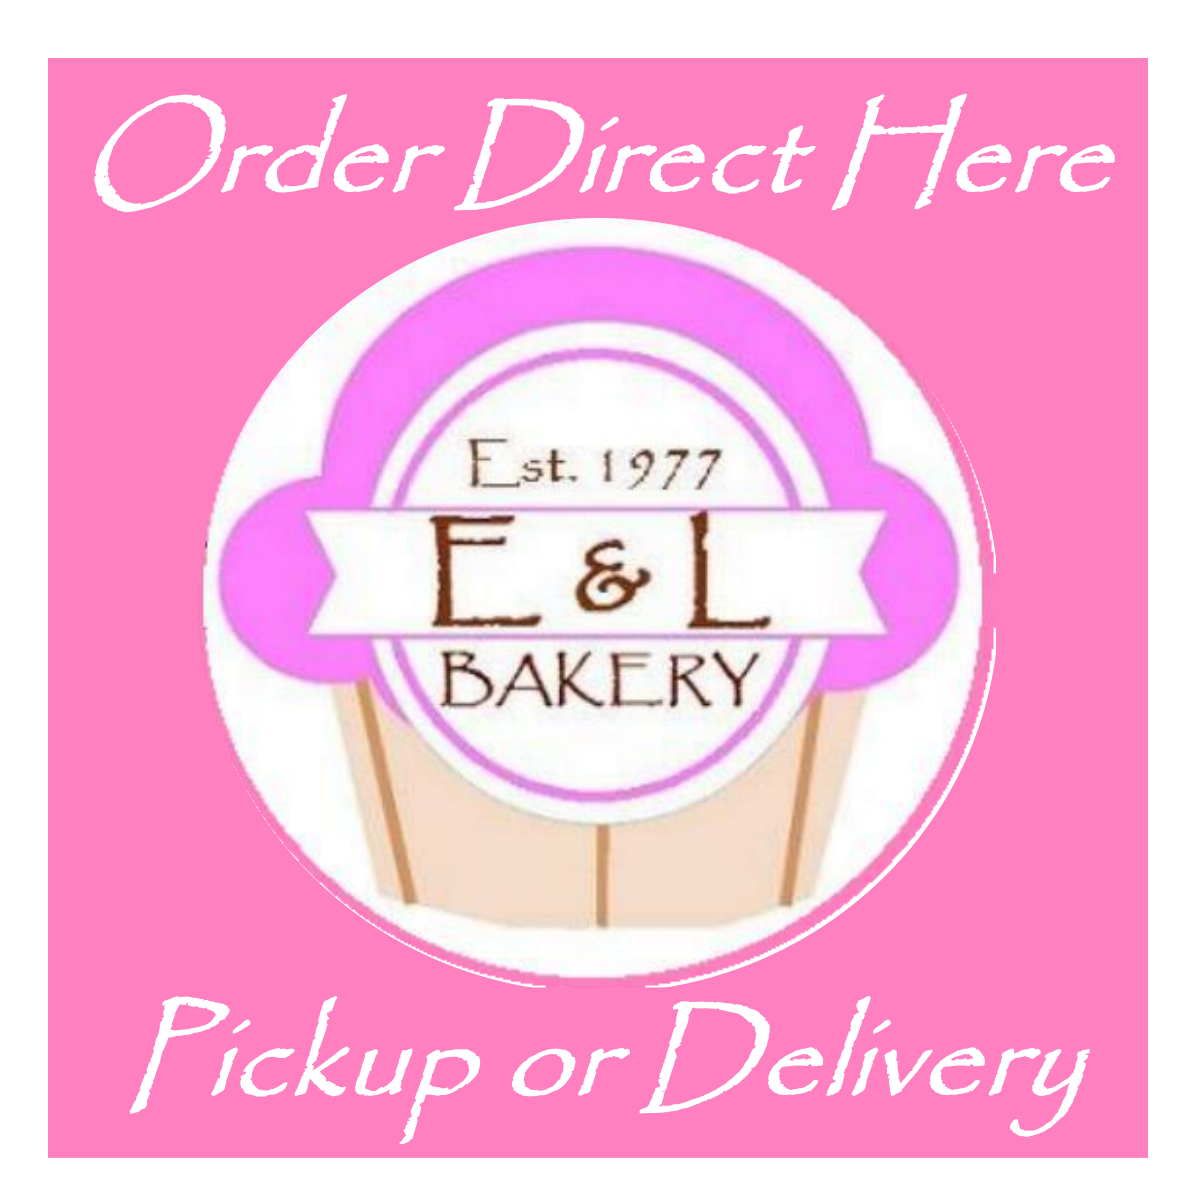 Order Direct
From E & L